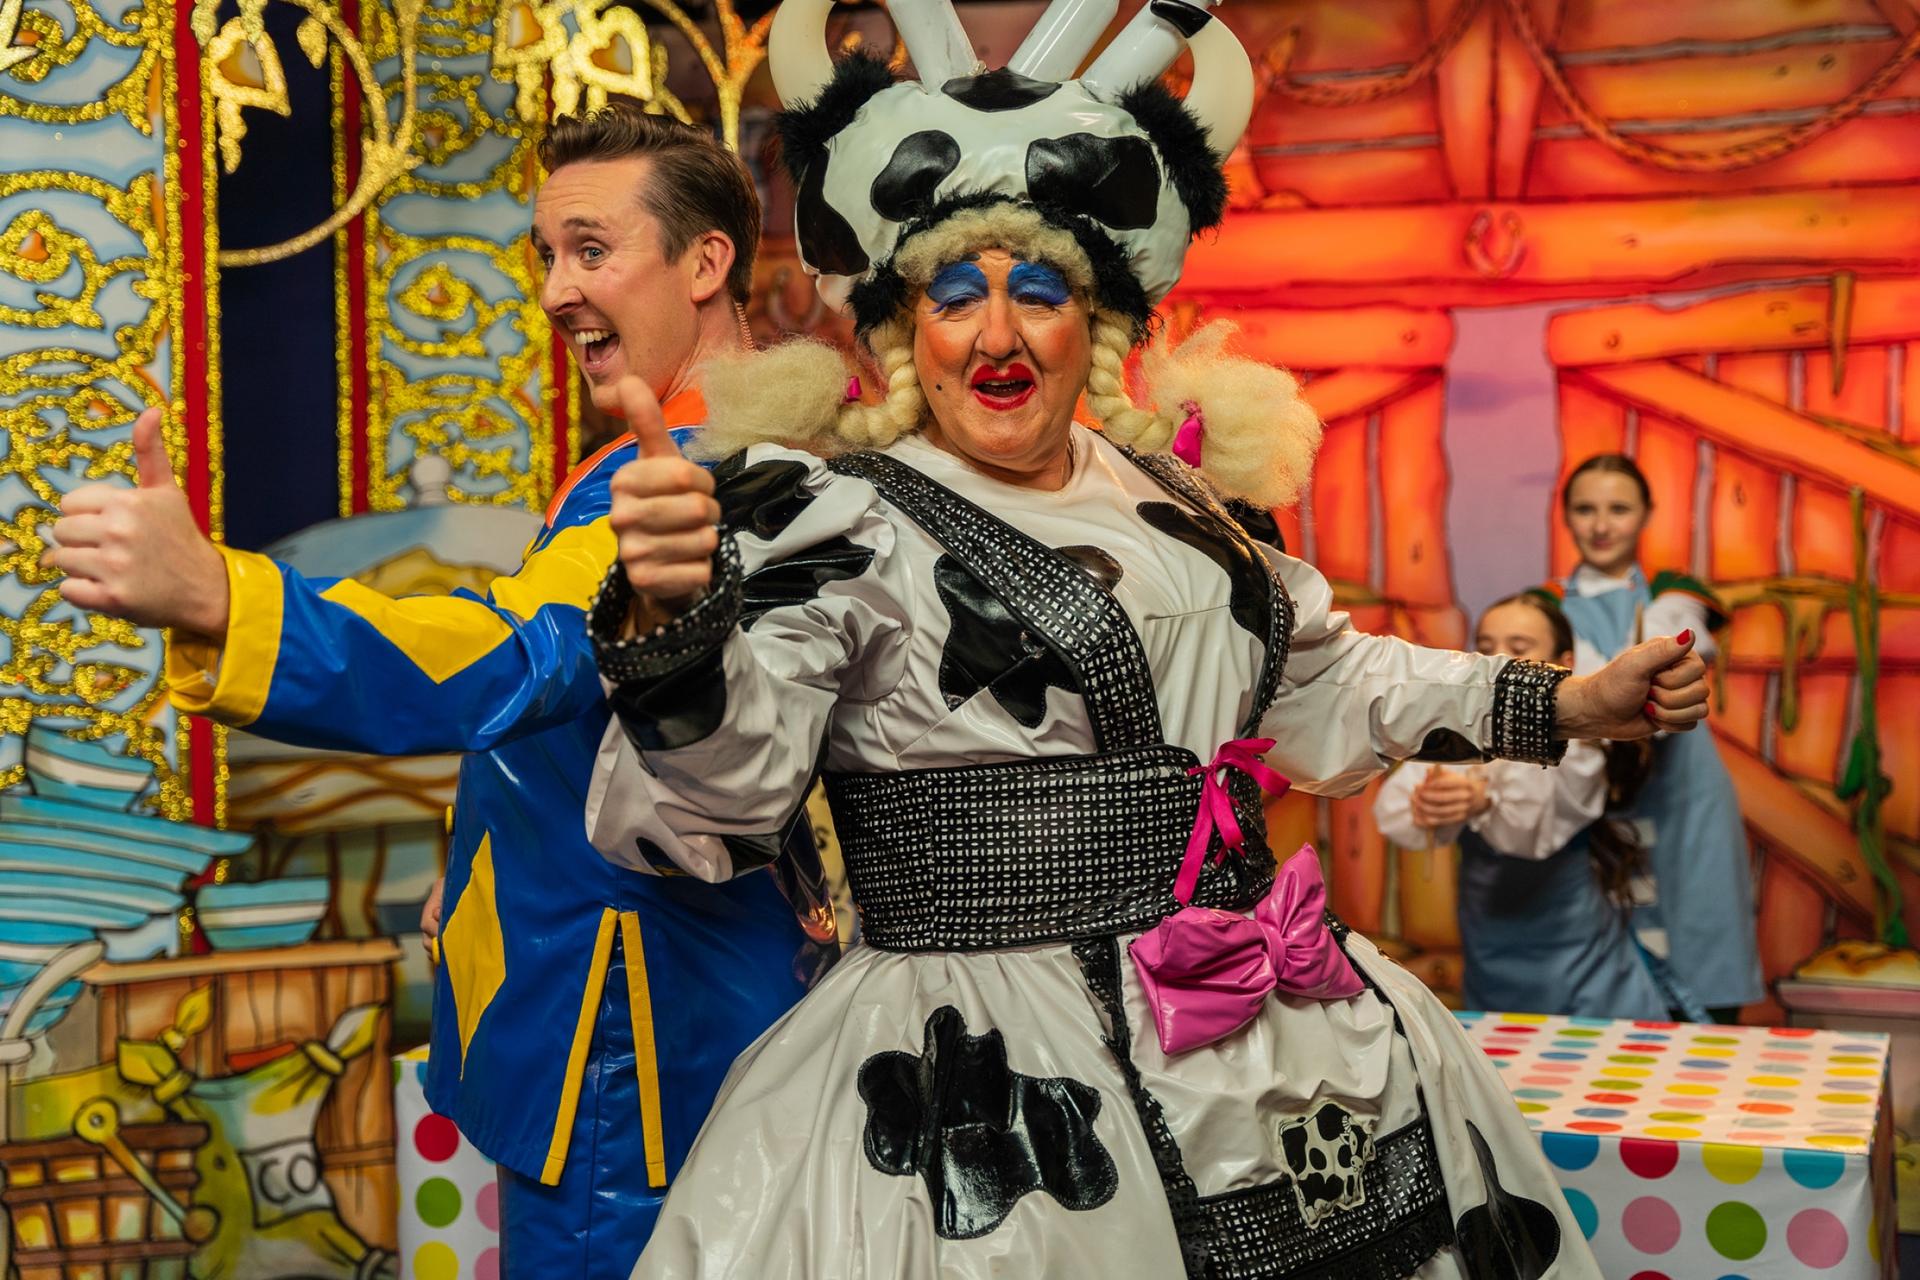 Craig Hollingsworth (Simon Trott) and Iain Lauchlan (Dame Trott) usually perform in the UK's Belgrade Theatre’s Christmas pantomime. 